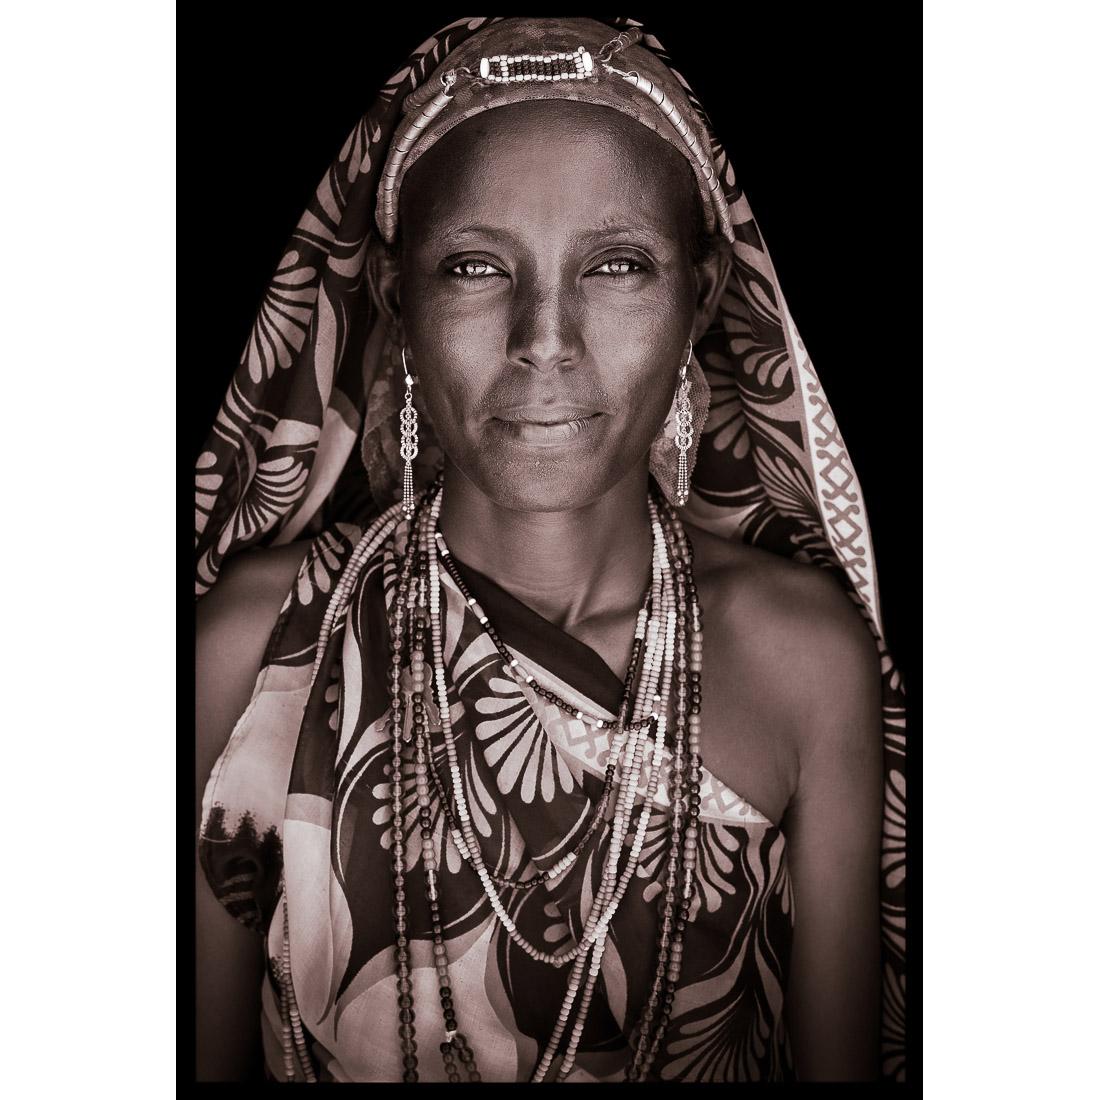 A portrait of Madina, a Gabbra woman from northern Kenya in 2019.

John Kenny’s work is all shot on location in some of the remotest corners of Africa. His images are all taken with natural light and his subjects in their day to day attire.

The